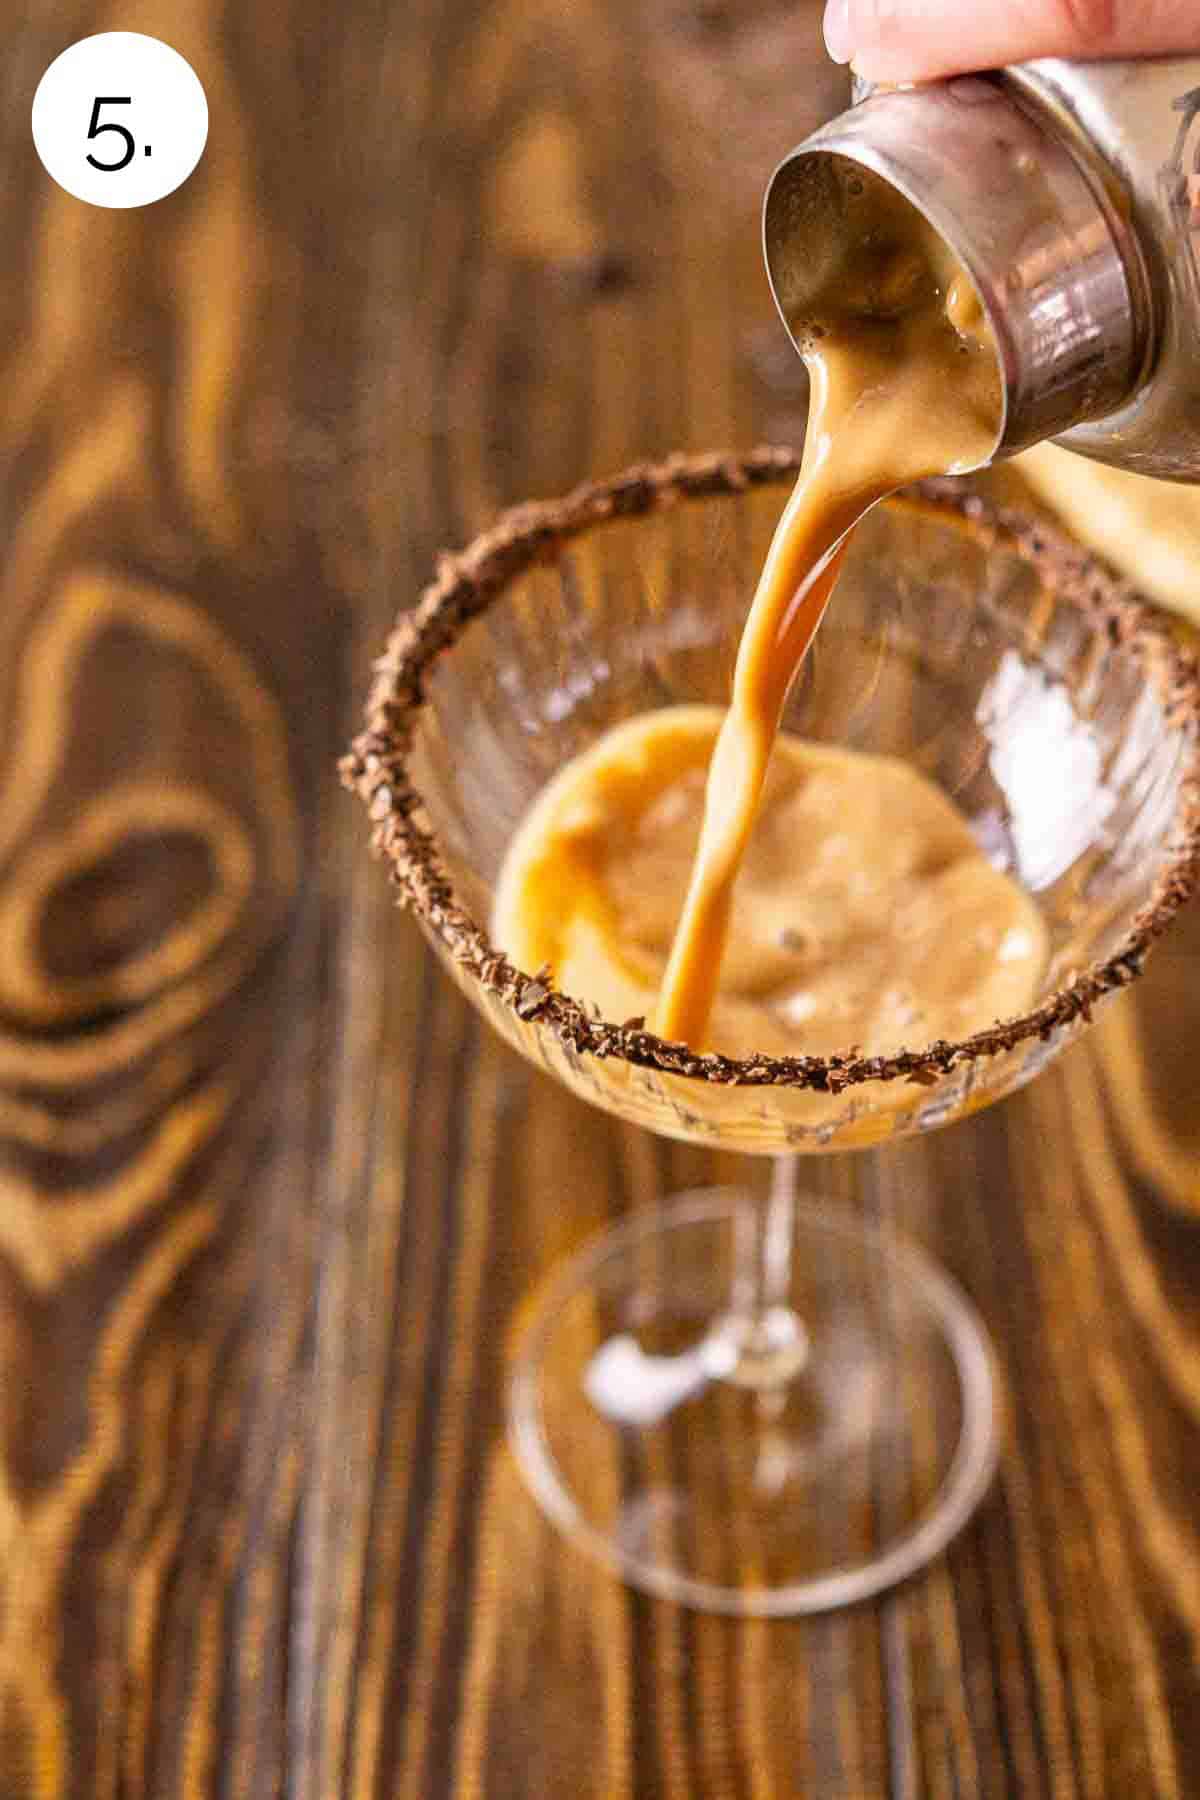 A hand straining the drink into a garnished martini glass after shaking on a brown wooden surface.